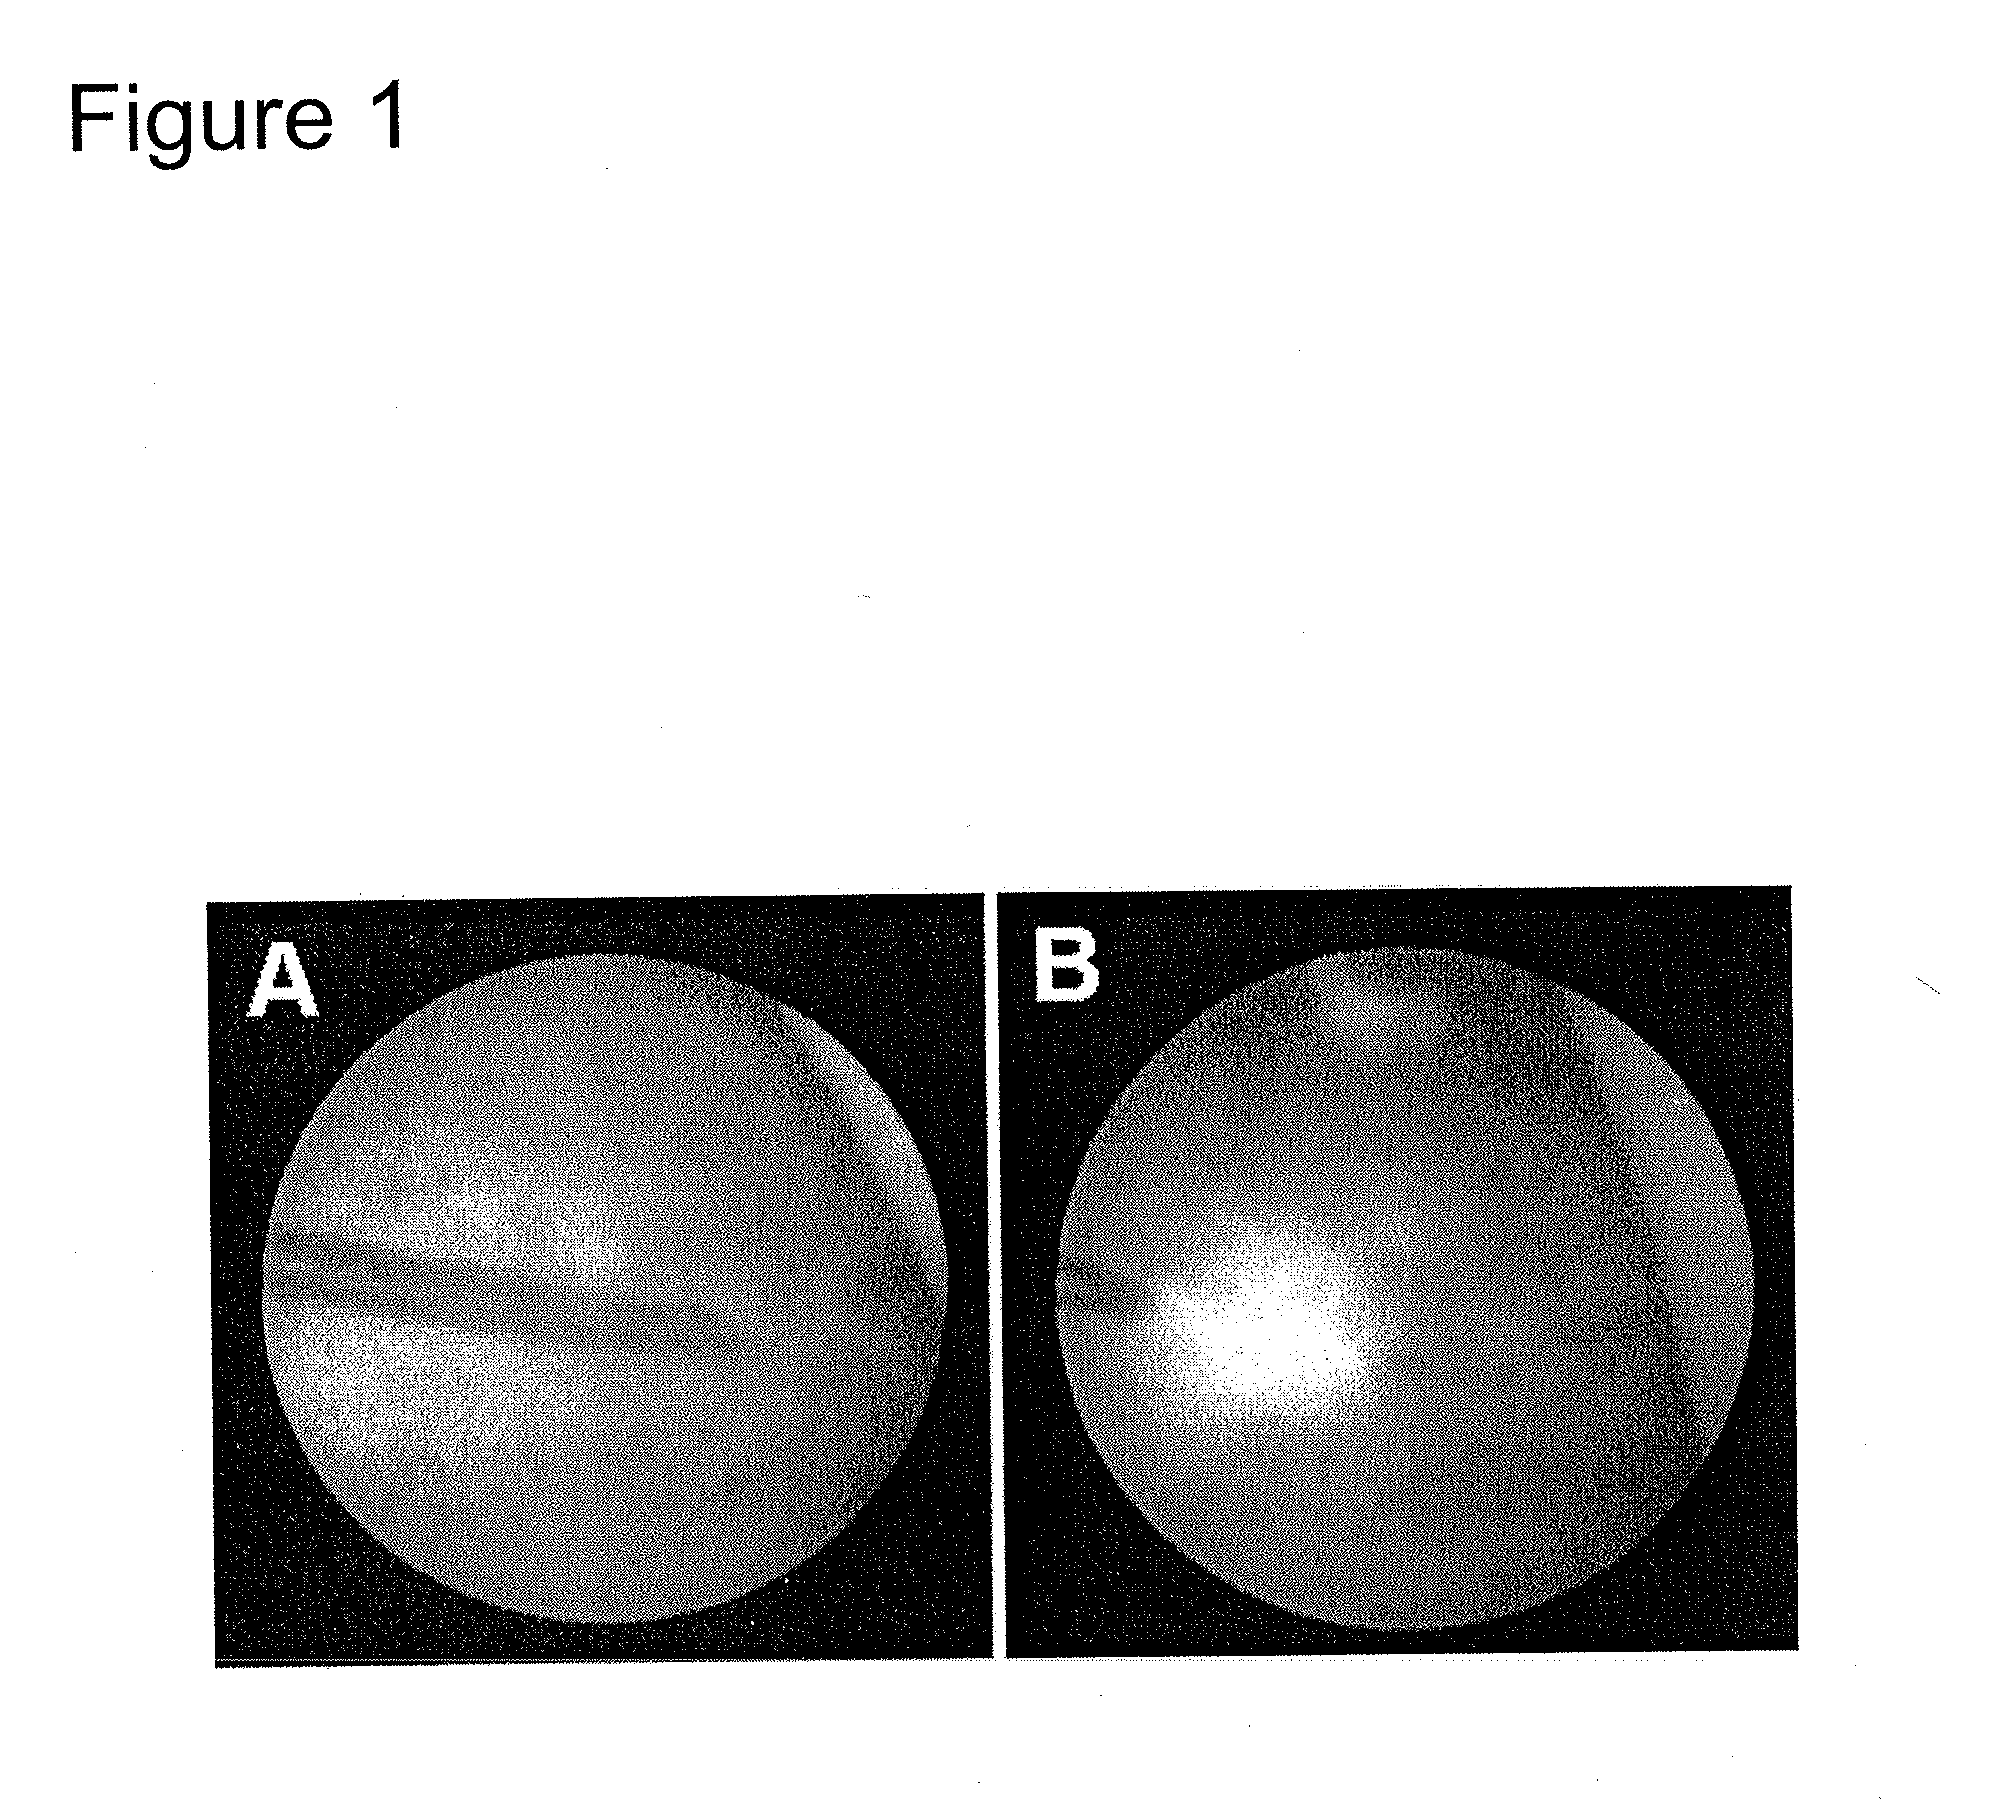 Apparatus and method for obtaining and providing imaging information associated with at least one portion of a sample, and effecting such portion(s)